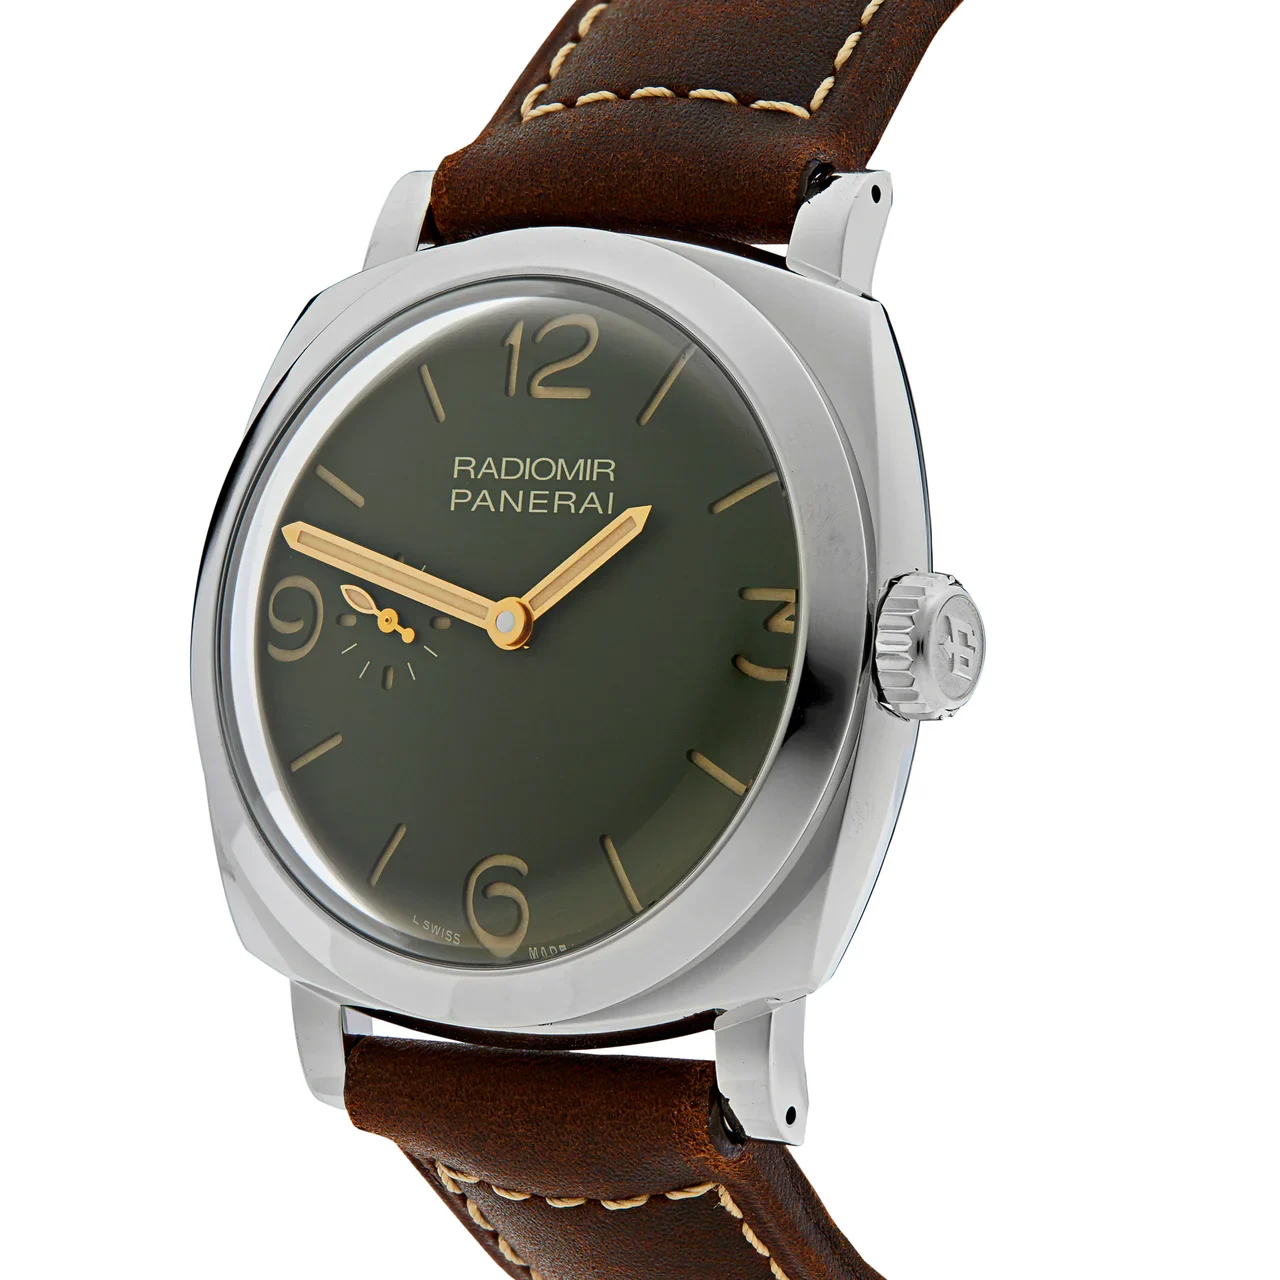 2018 Panerai Radiomir 1940 45 3 Days Automatic Stainless Steel / Military Green PAM00995 Listing Image 2